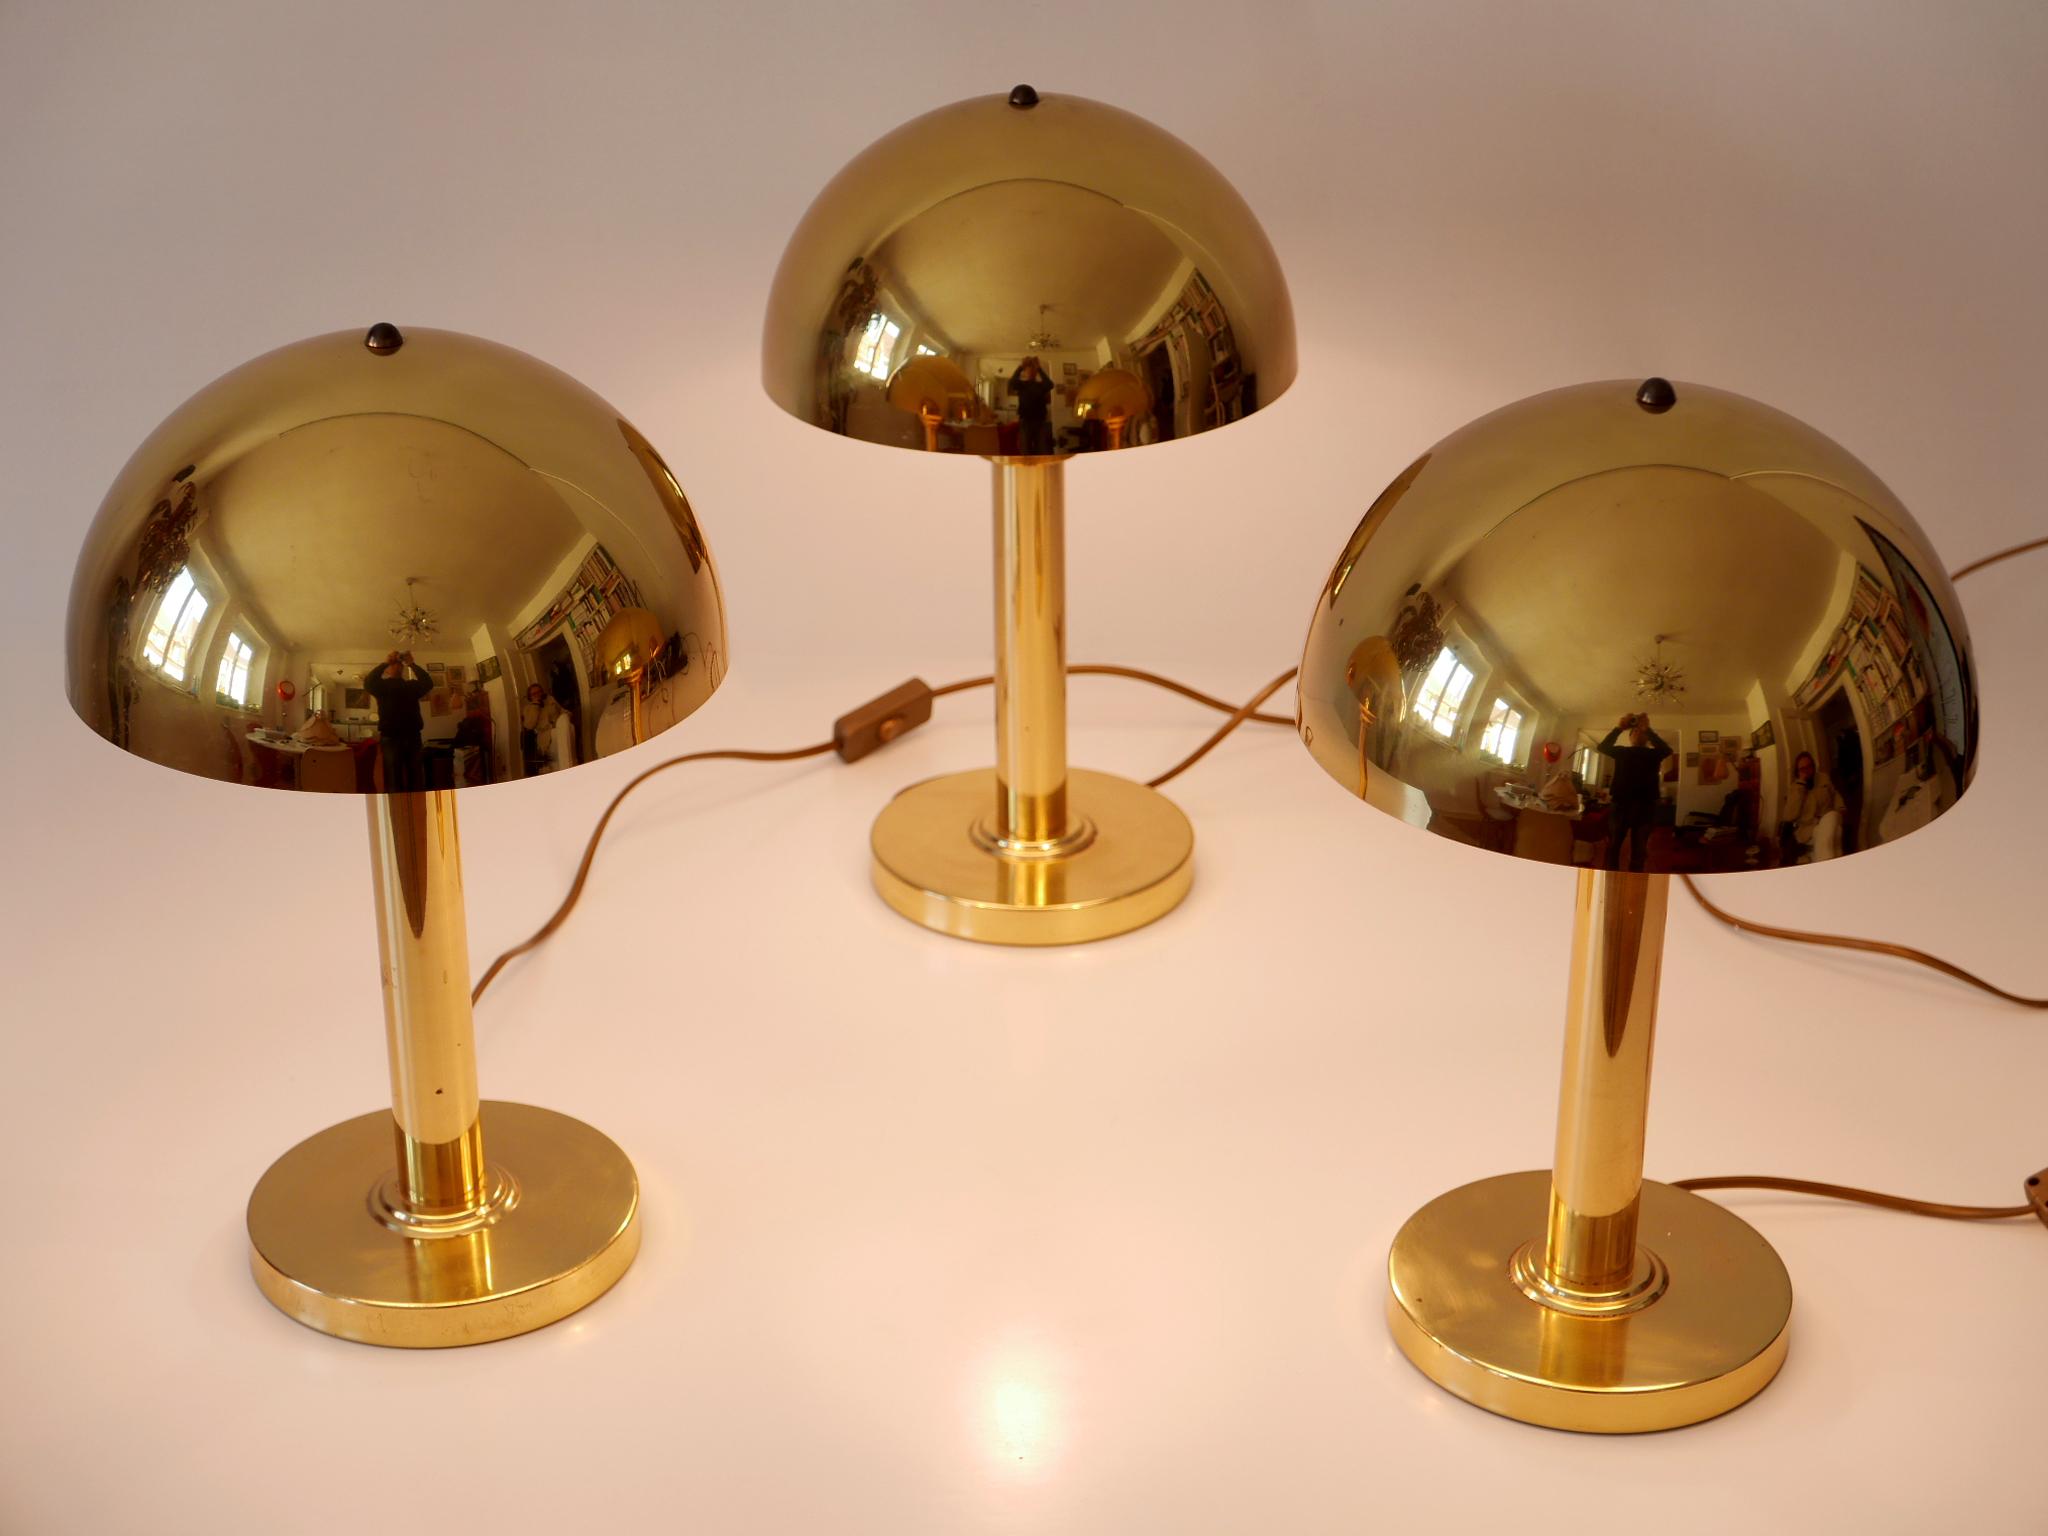 Elegant Mid-Century Modern Brass Table Lamps by WSB, Germany, 1960s For Sale 11